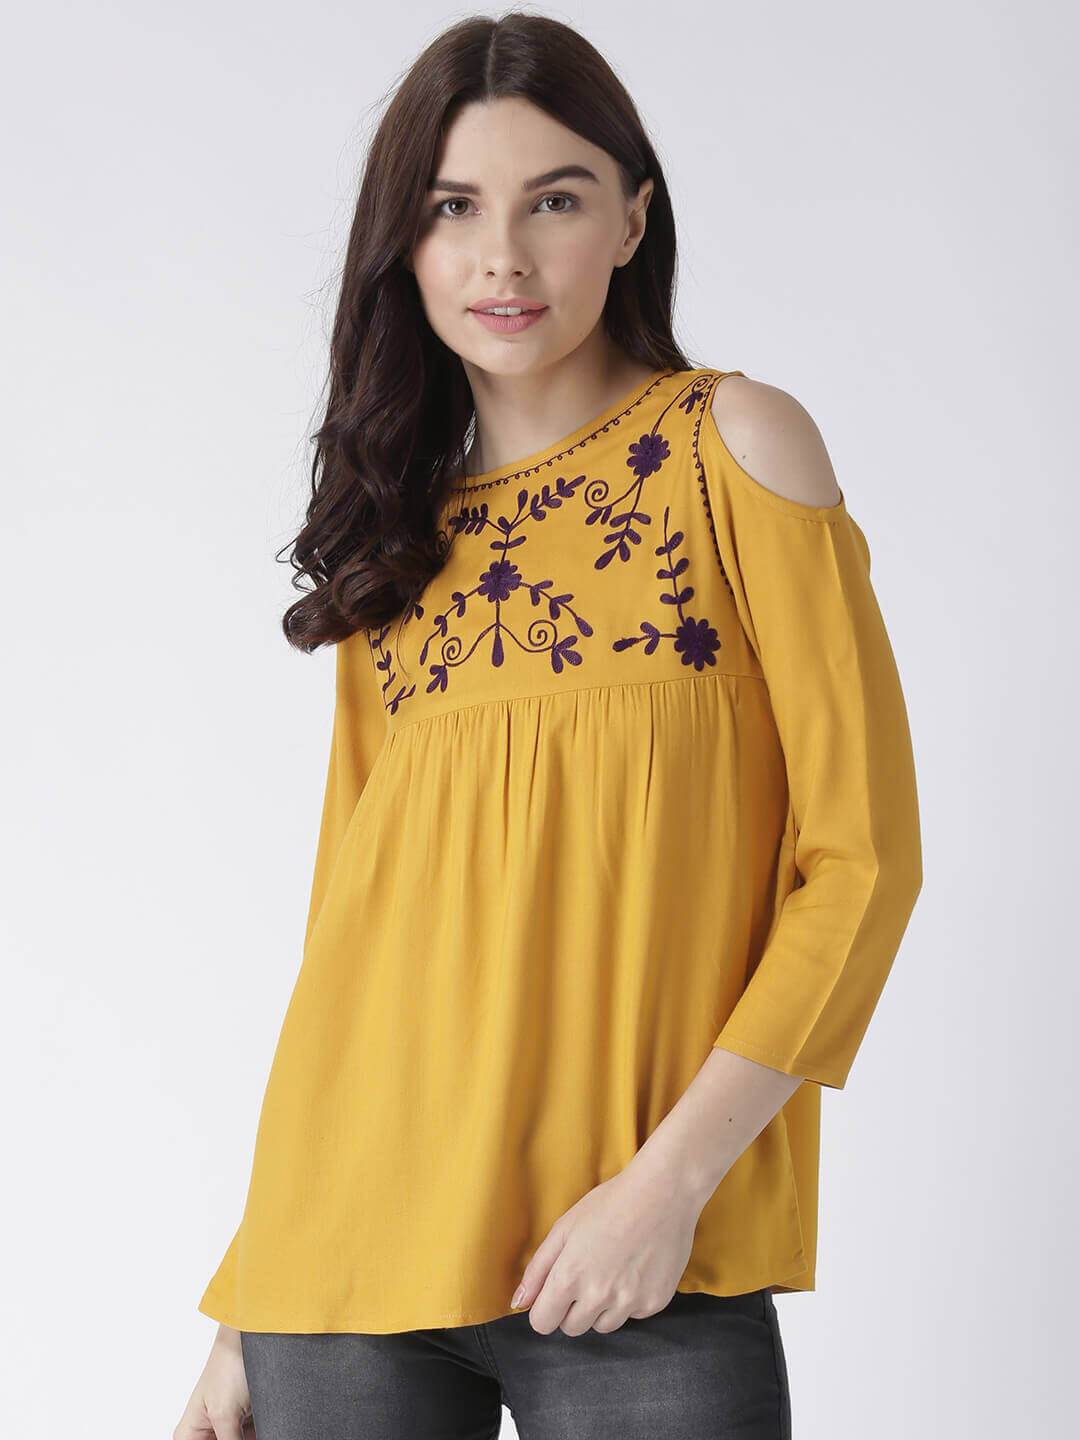 Women'S Yellow Cold Shoulder Top With Yoke Embroidery